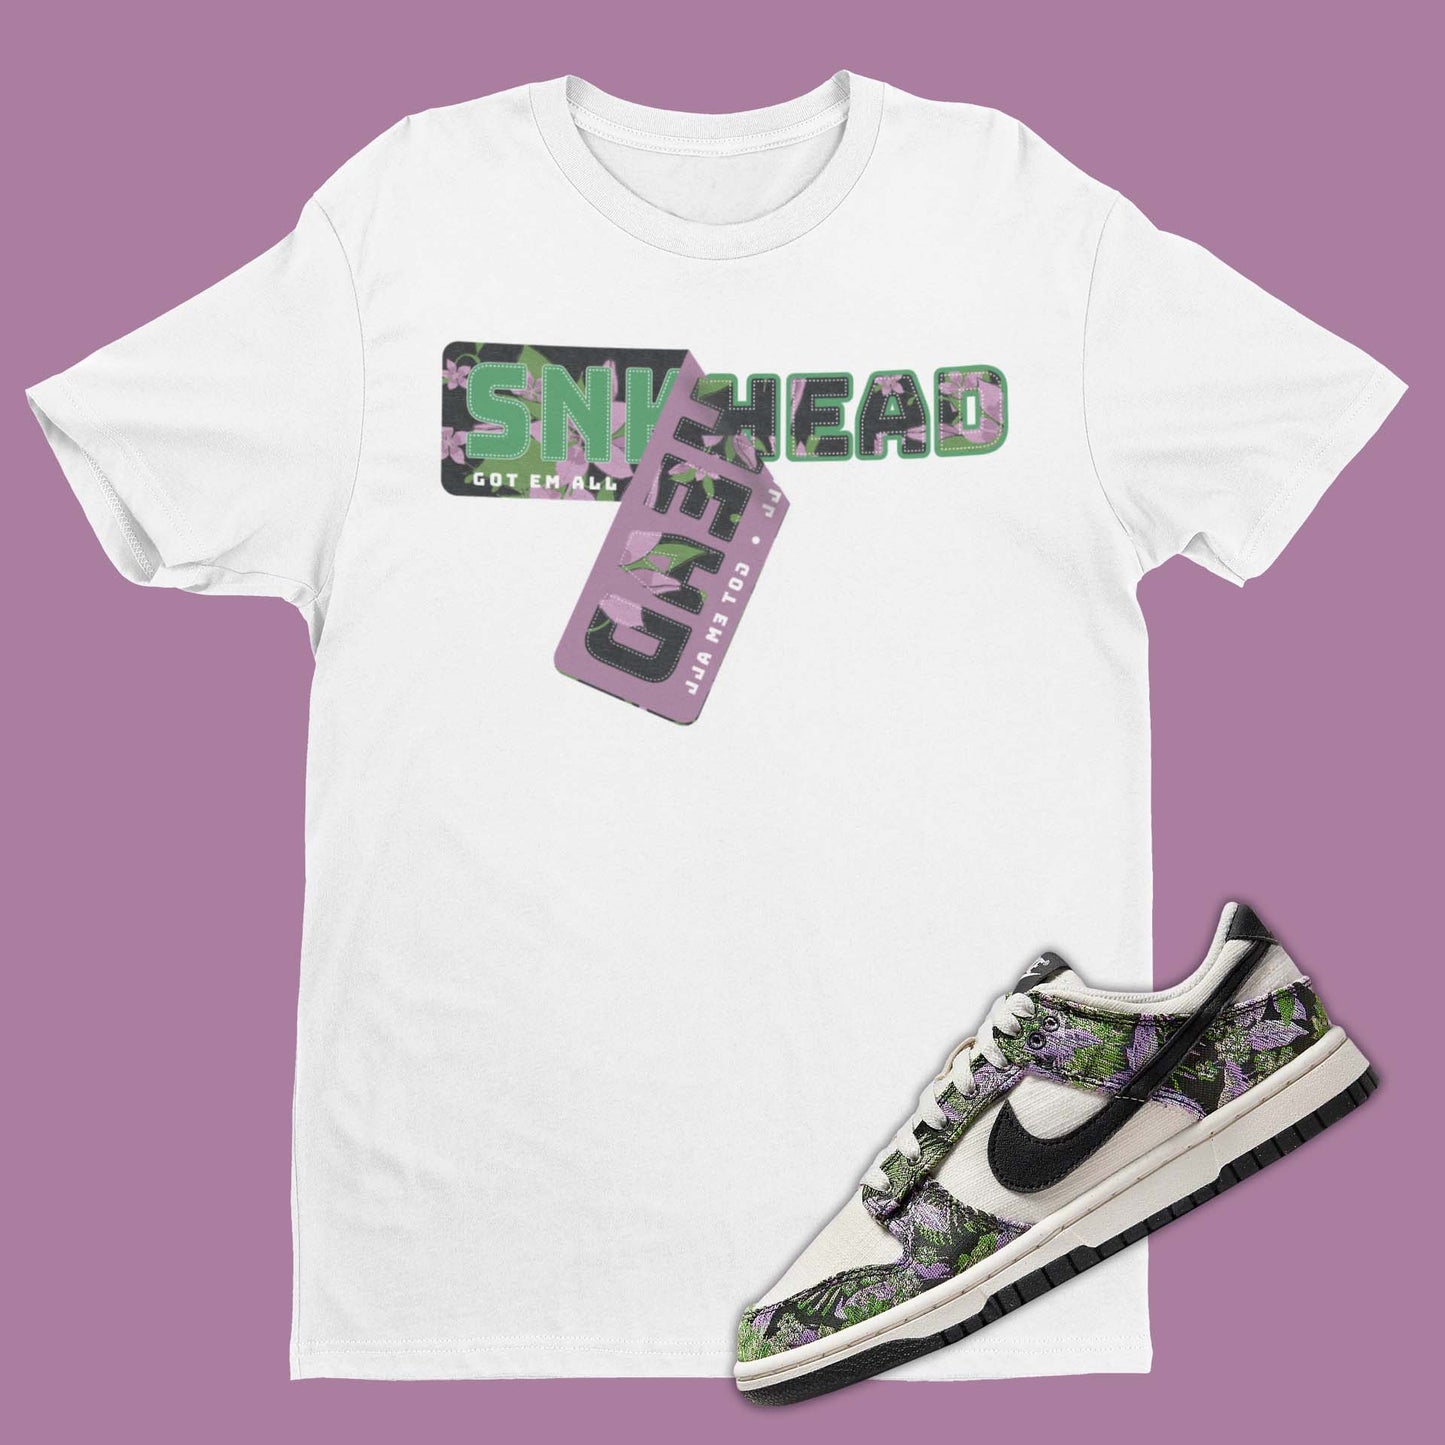 Stay stylish with the Sneaker Sticker Nike Dunk Low Floral Tapestry Matching T-Shirt from SNKADX